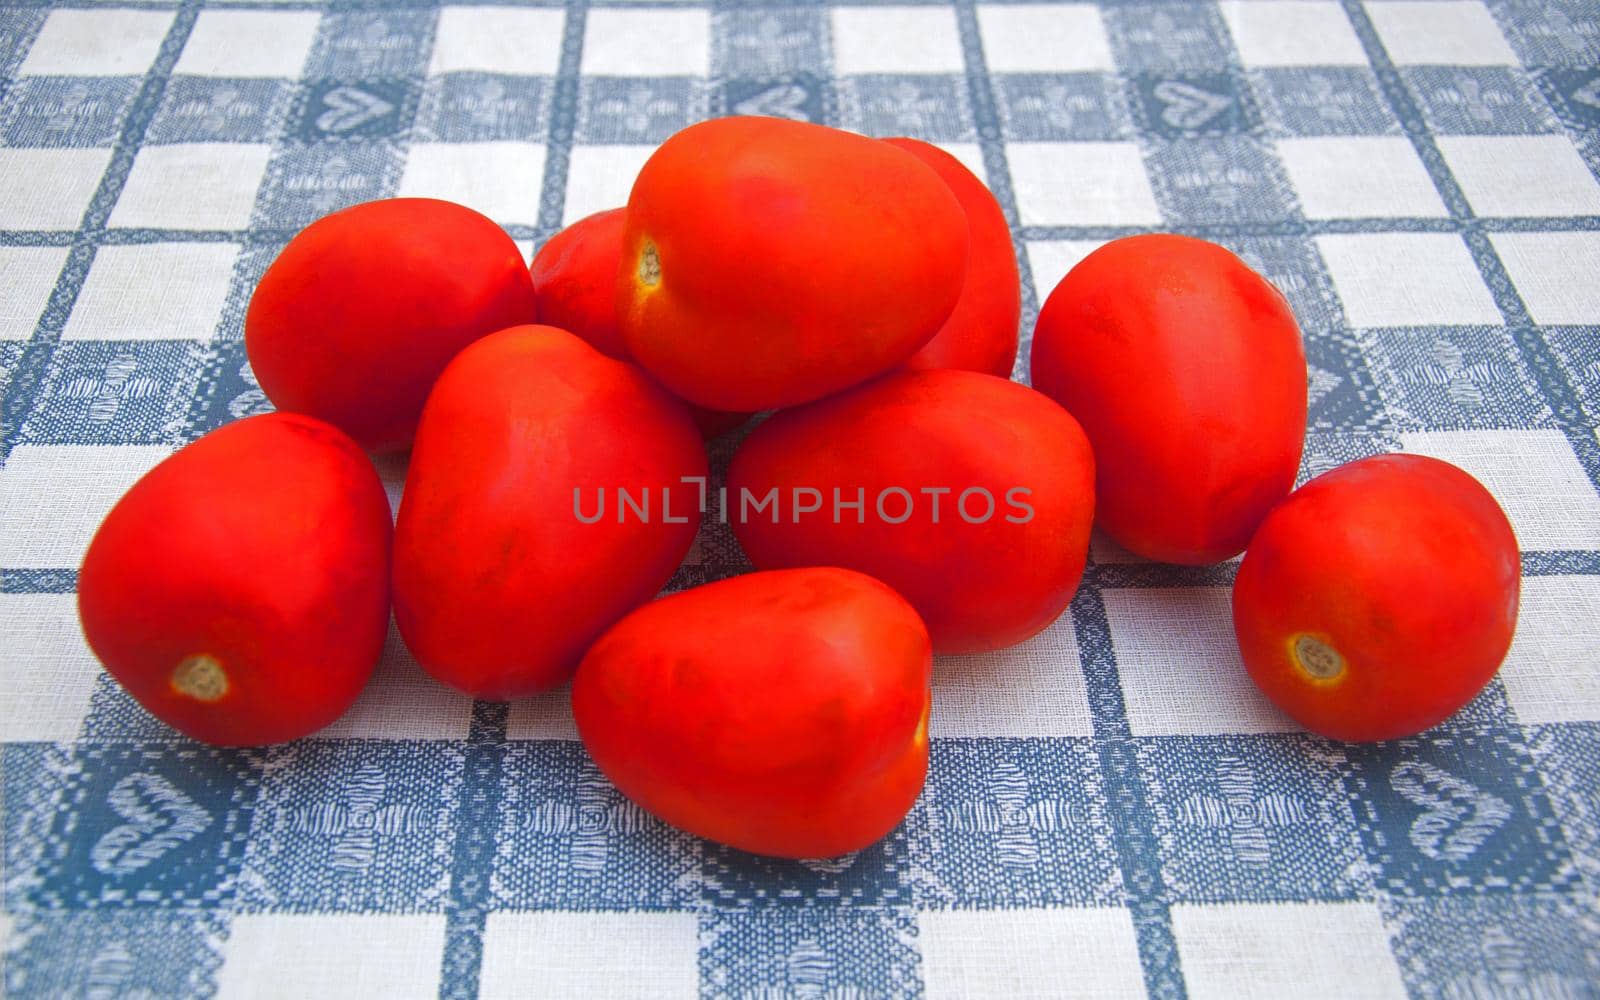 Red plum tomatoes on the table, summer